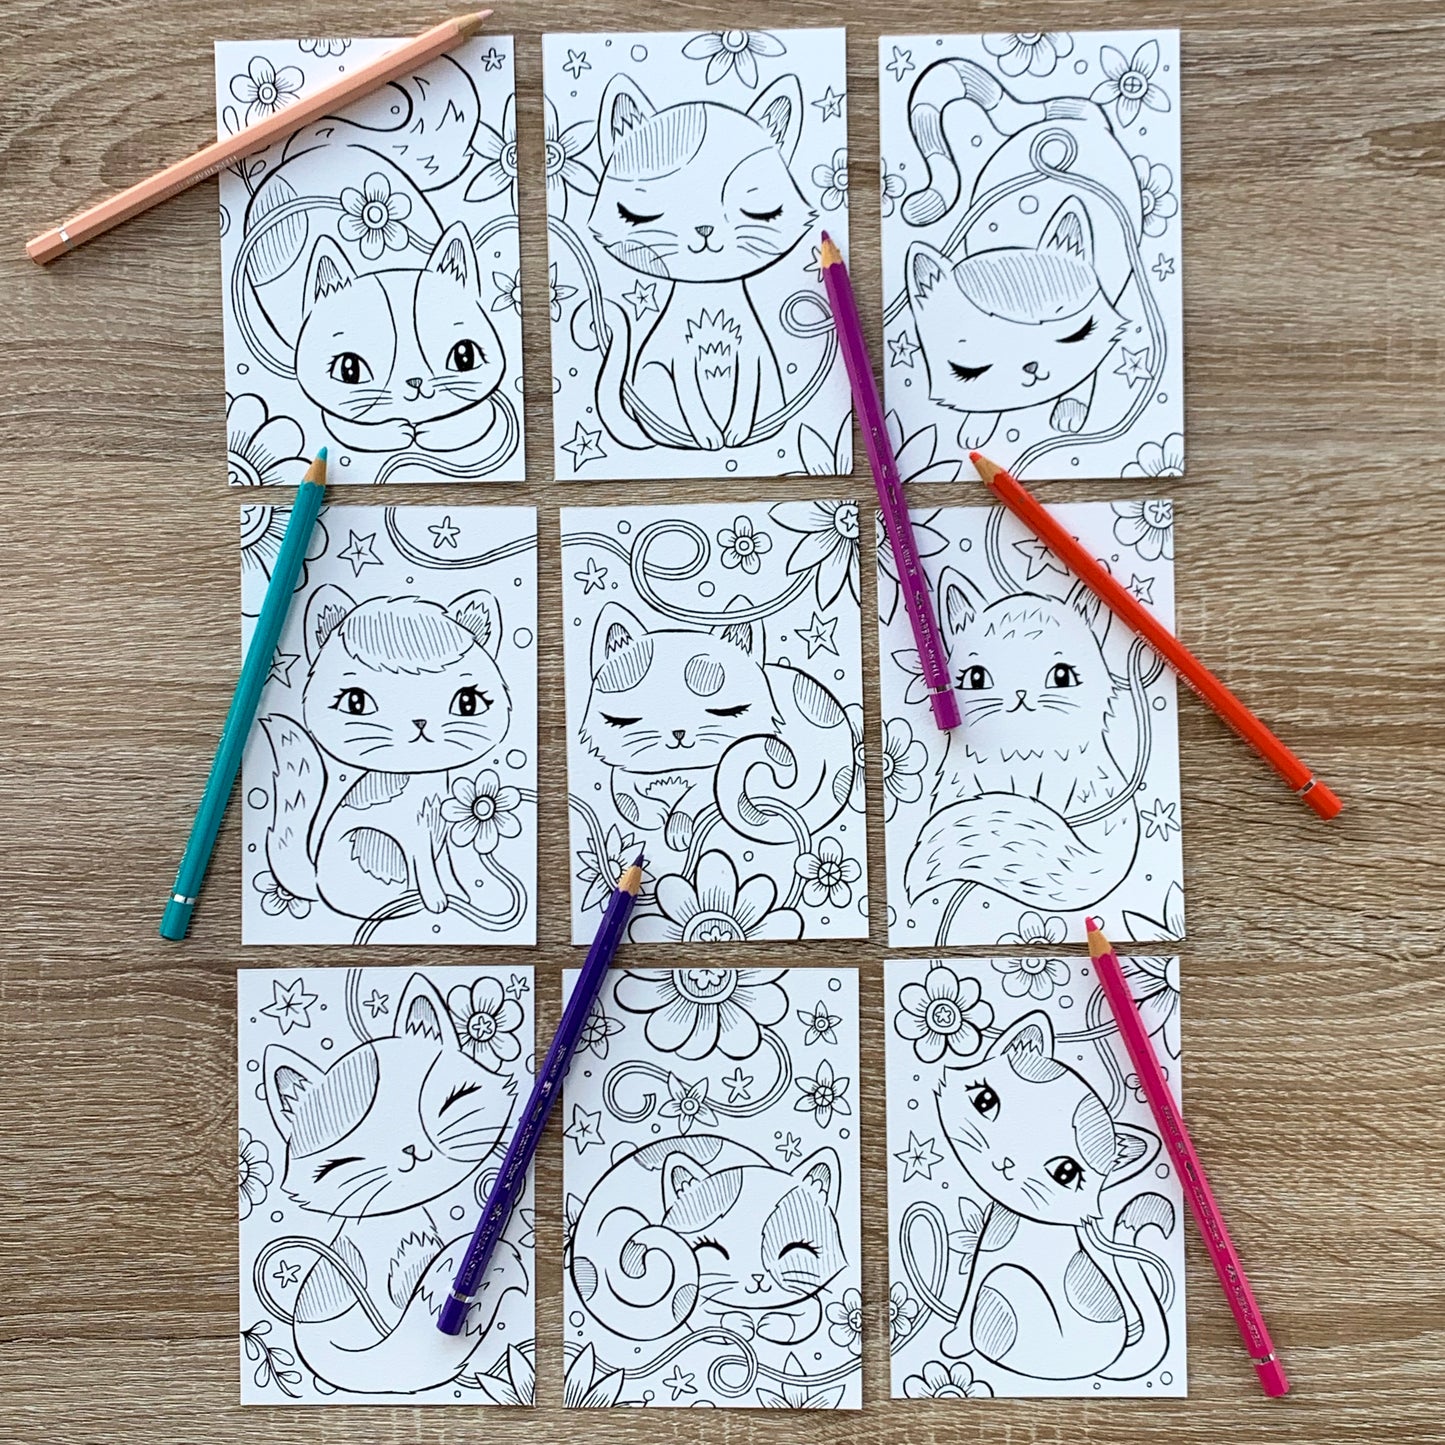 Pocket Coloring Book - Kitty Cats | Instant Download pdf | Jeremiah Ketner